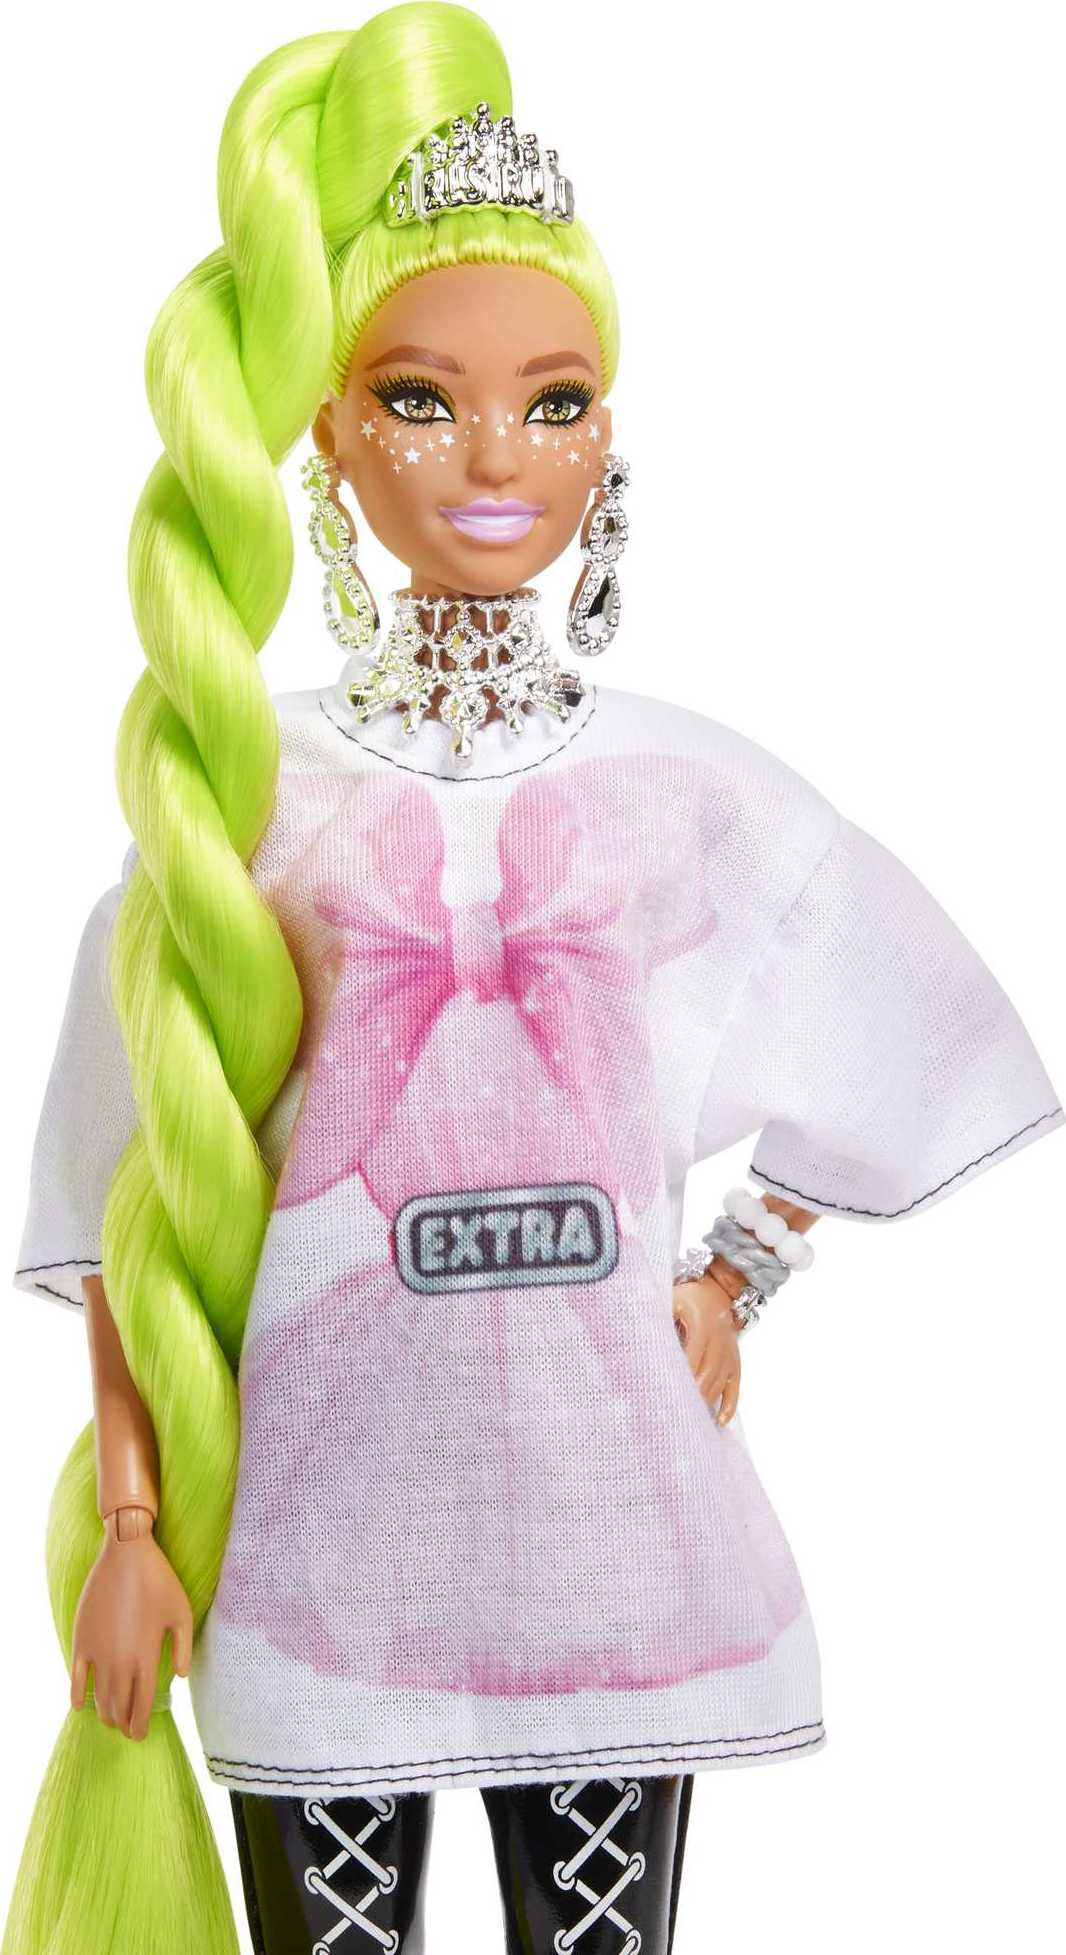 Barbie Extra Fashion Doll with Neon Green Haird with Feather Boa, Accessories and Pet - image 4 of 8